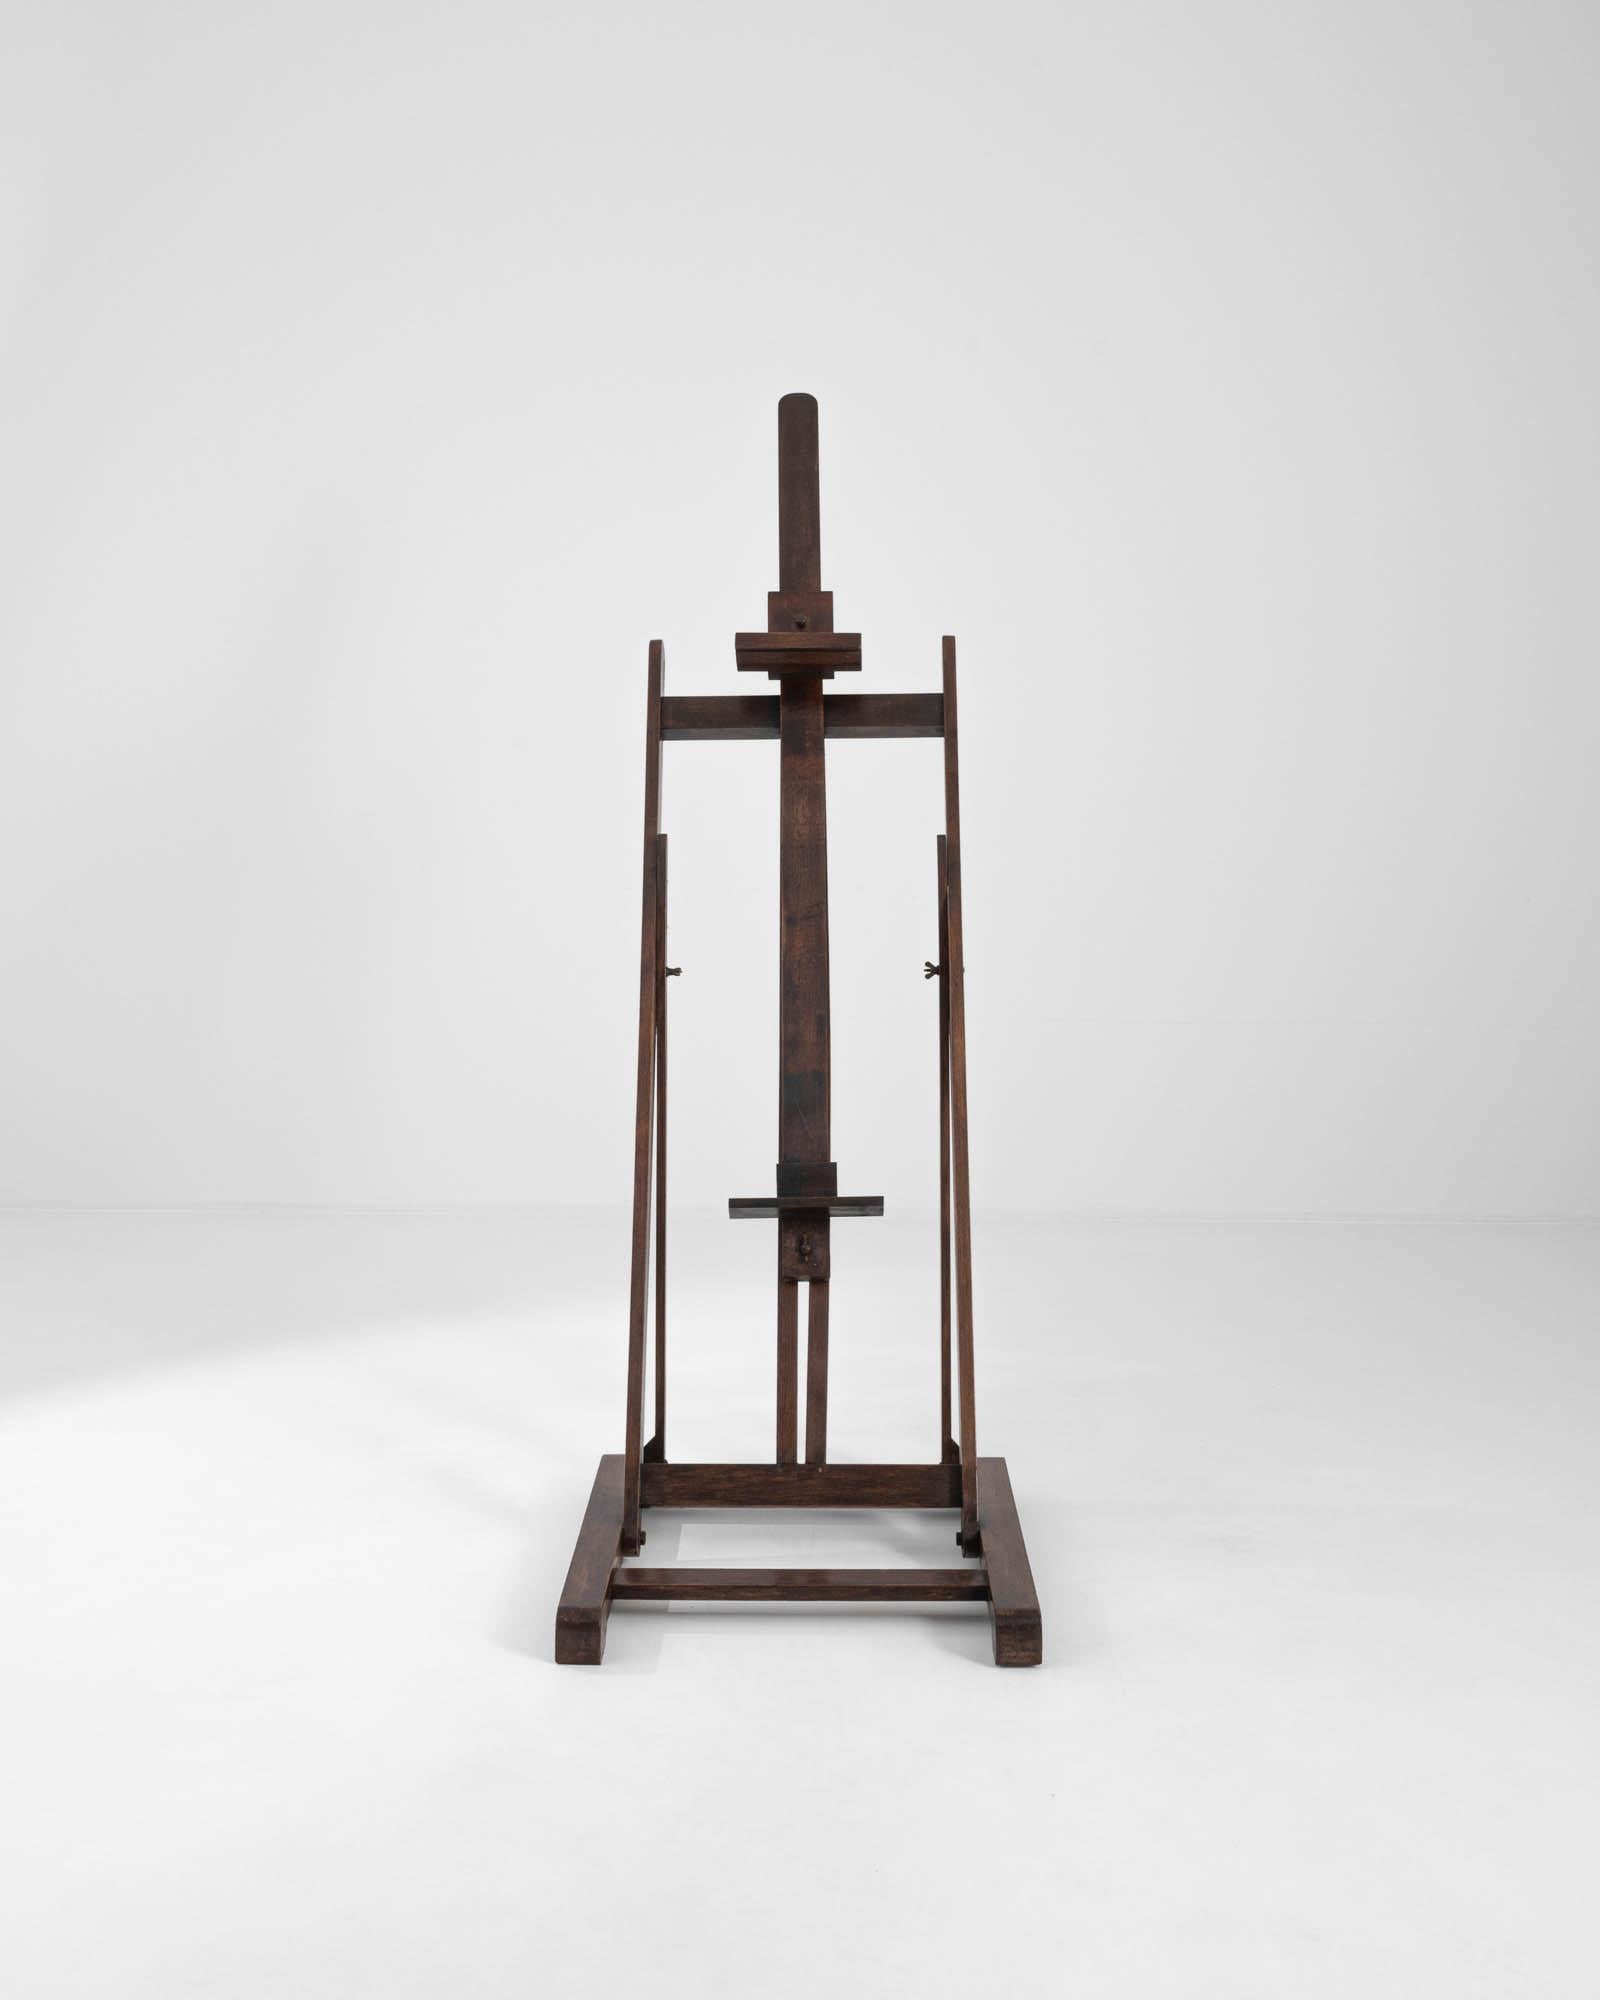 A 20th century wooden easel produced in France. Standing upright with a composed posture, this adjustable easel is ready for its next job. The richly stained wood creates an approachable palette, inviting its next artist to inspire their creativity.